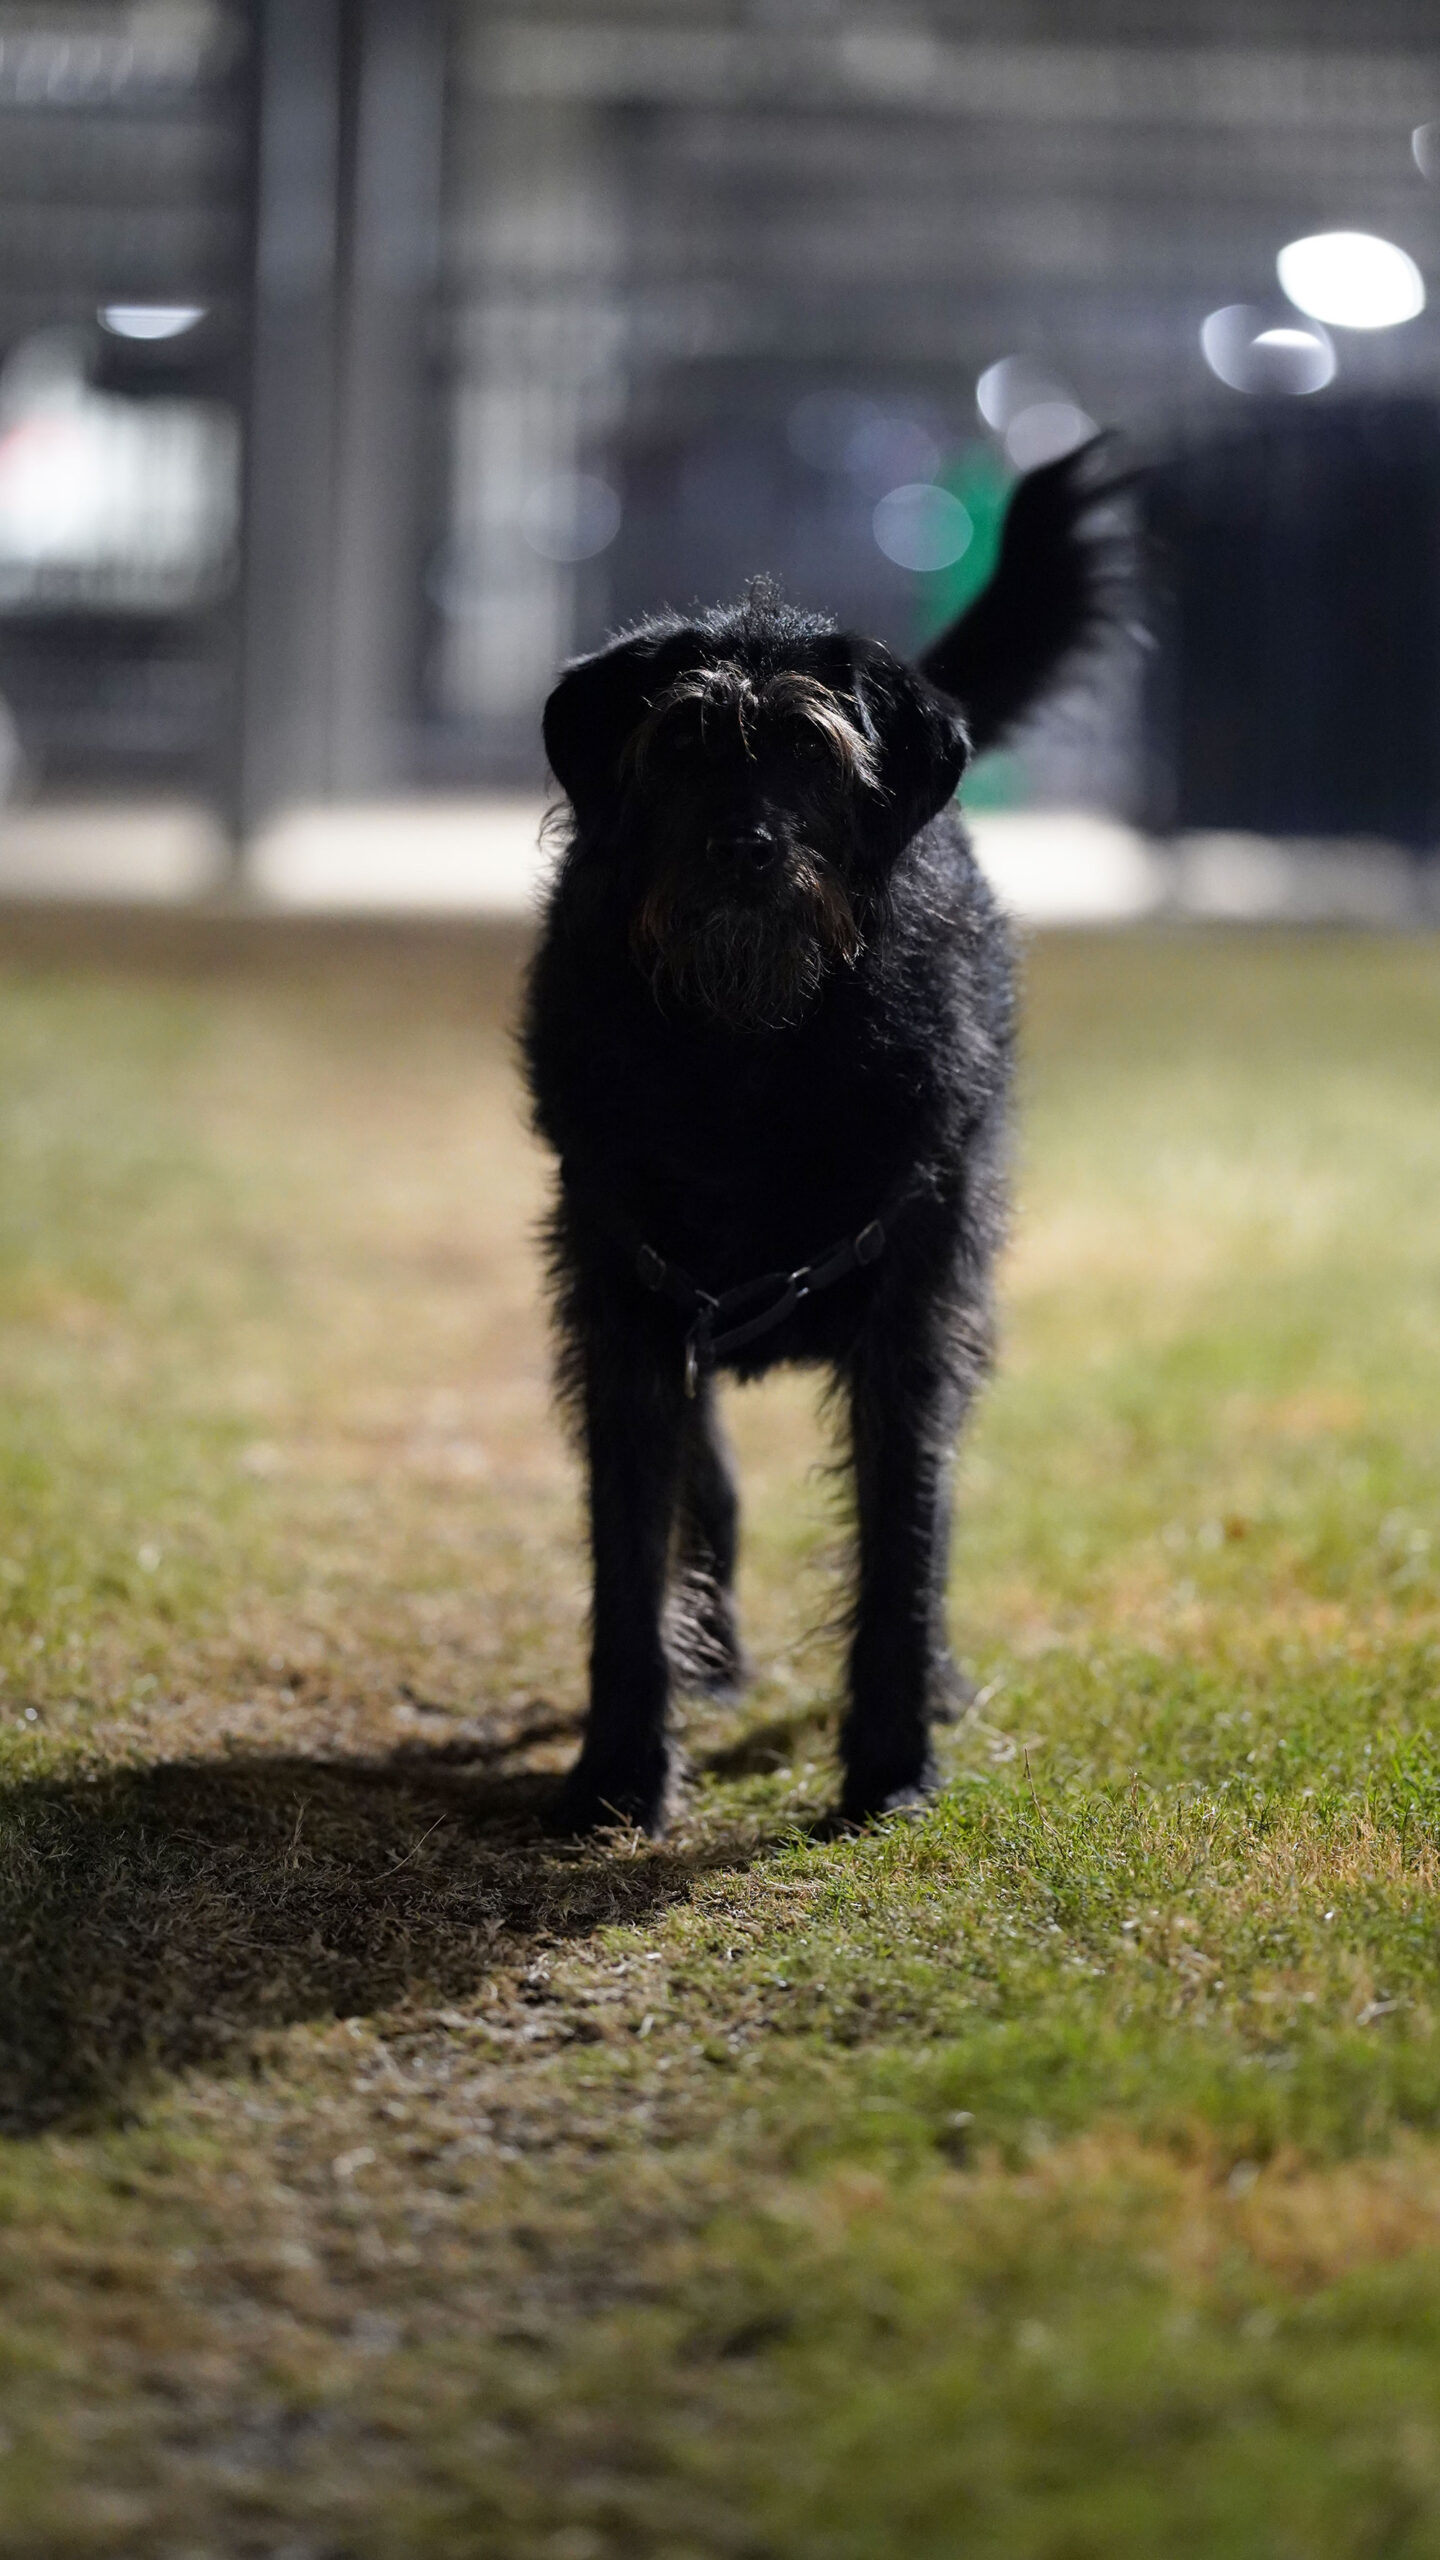 My black labradoodle Ingrid at our apartment building dog run.